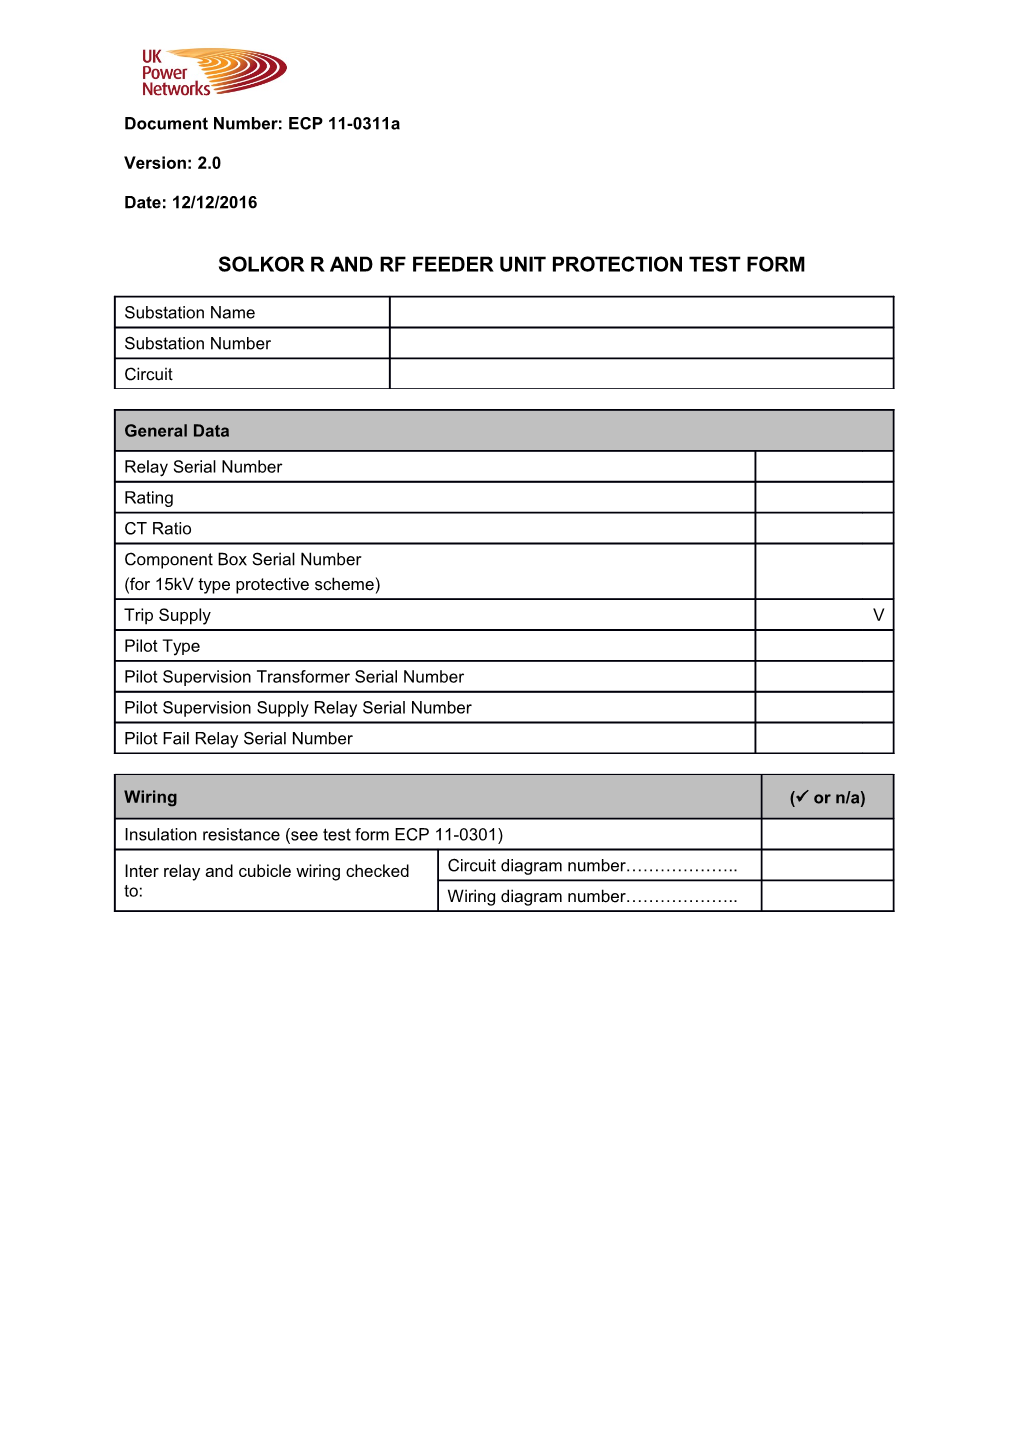 ECP 11-0311A SOLKOR R and RF Feeder Unit Protection Test Form